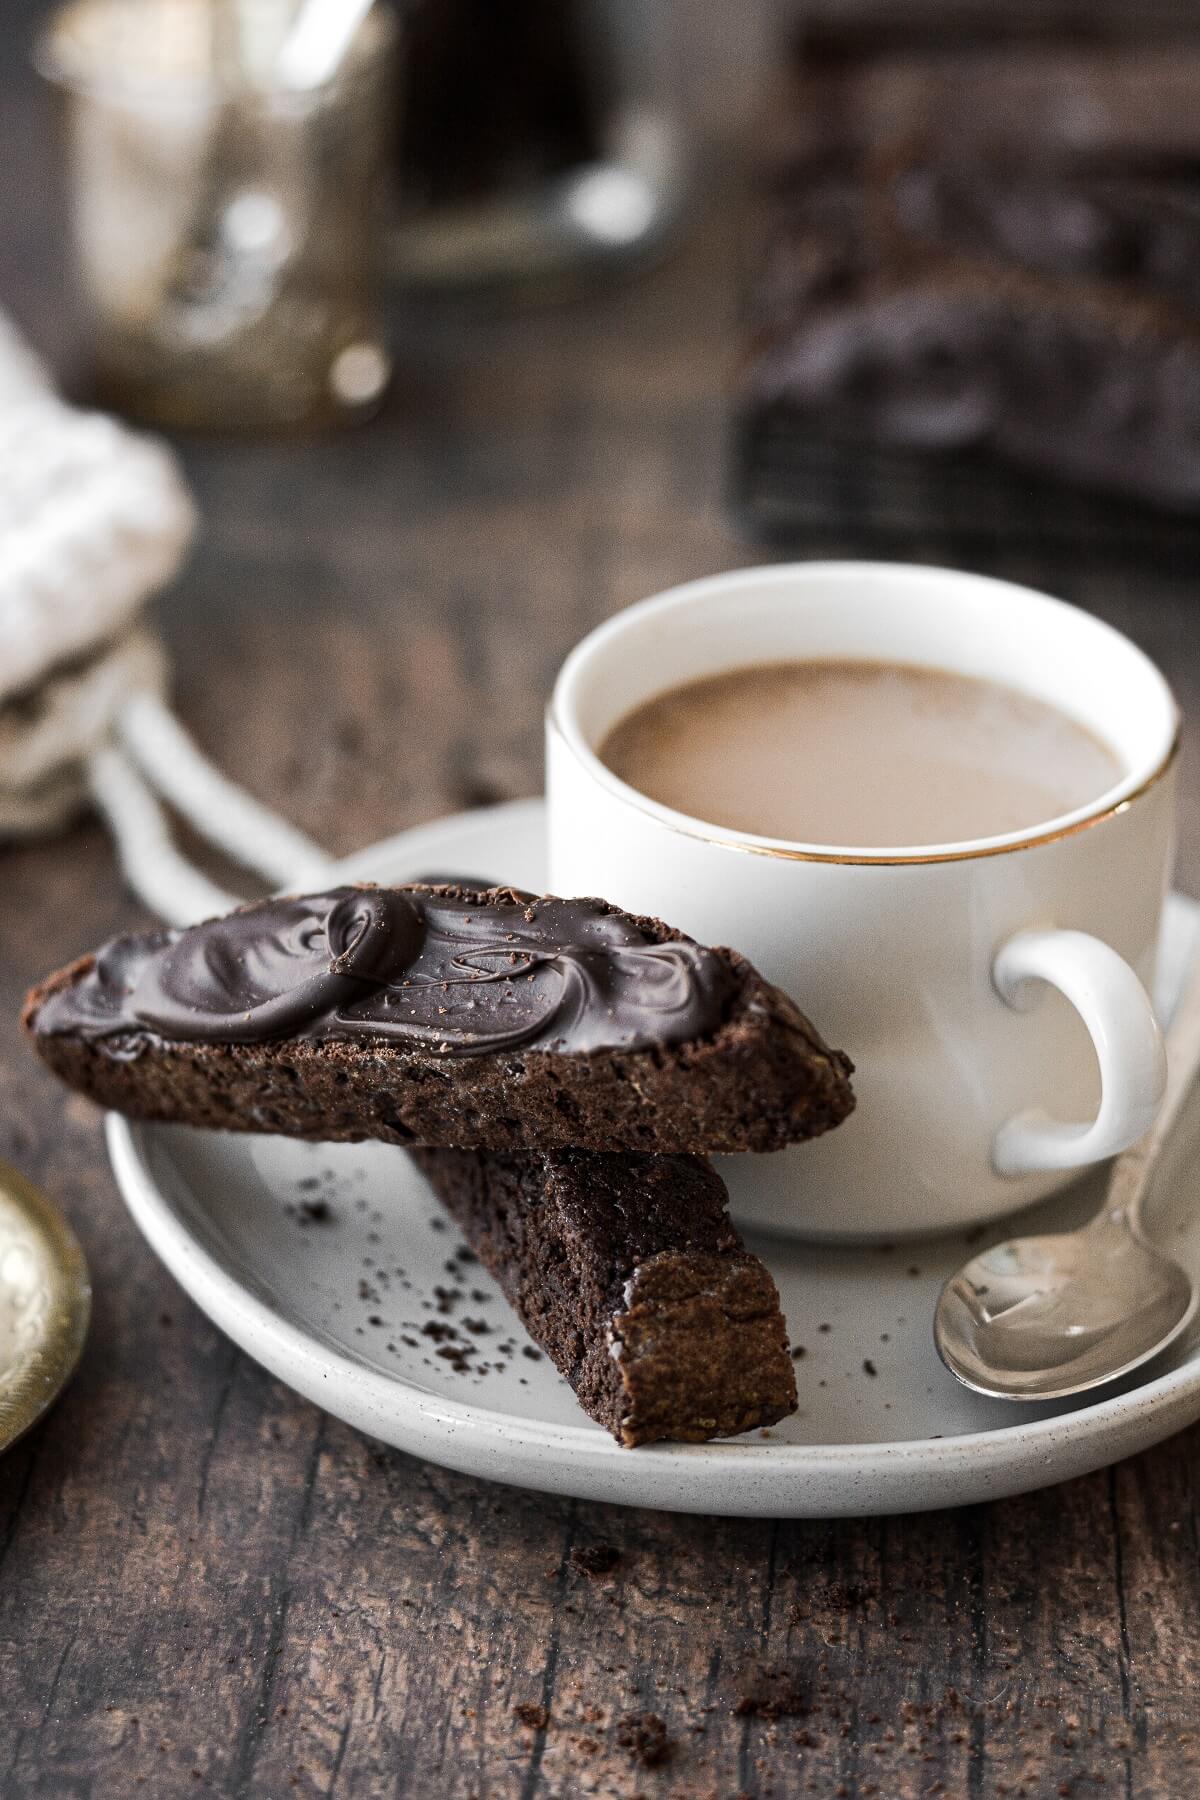 Two chocolate biscotti on a plate with a cup of coffee.